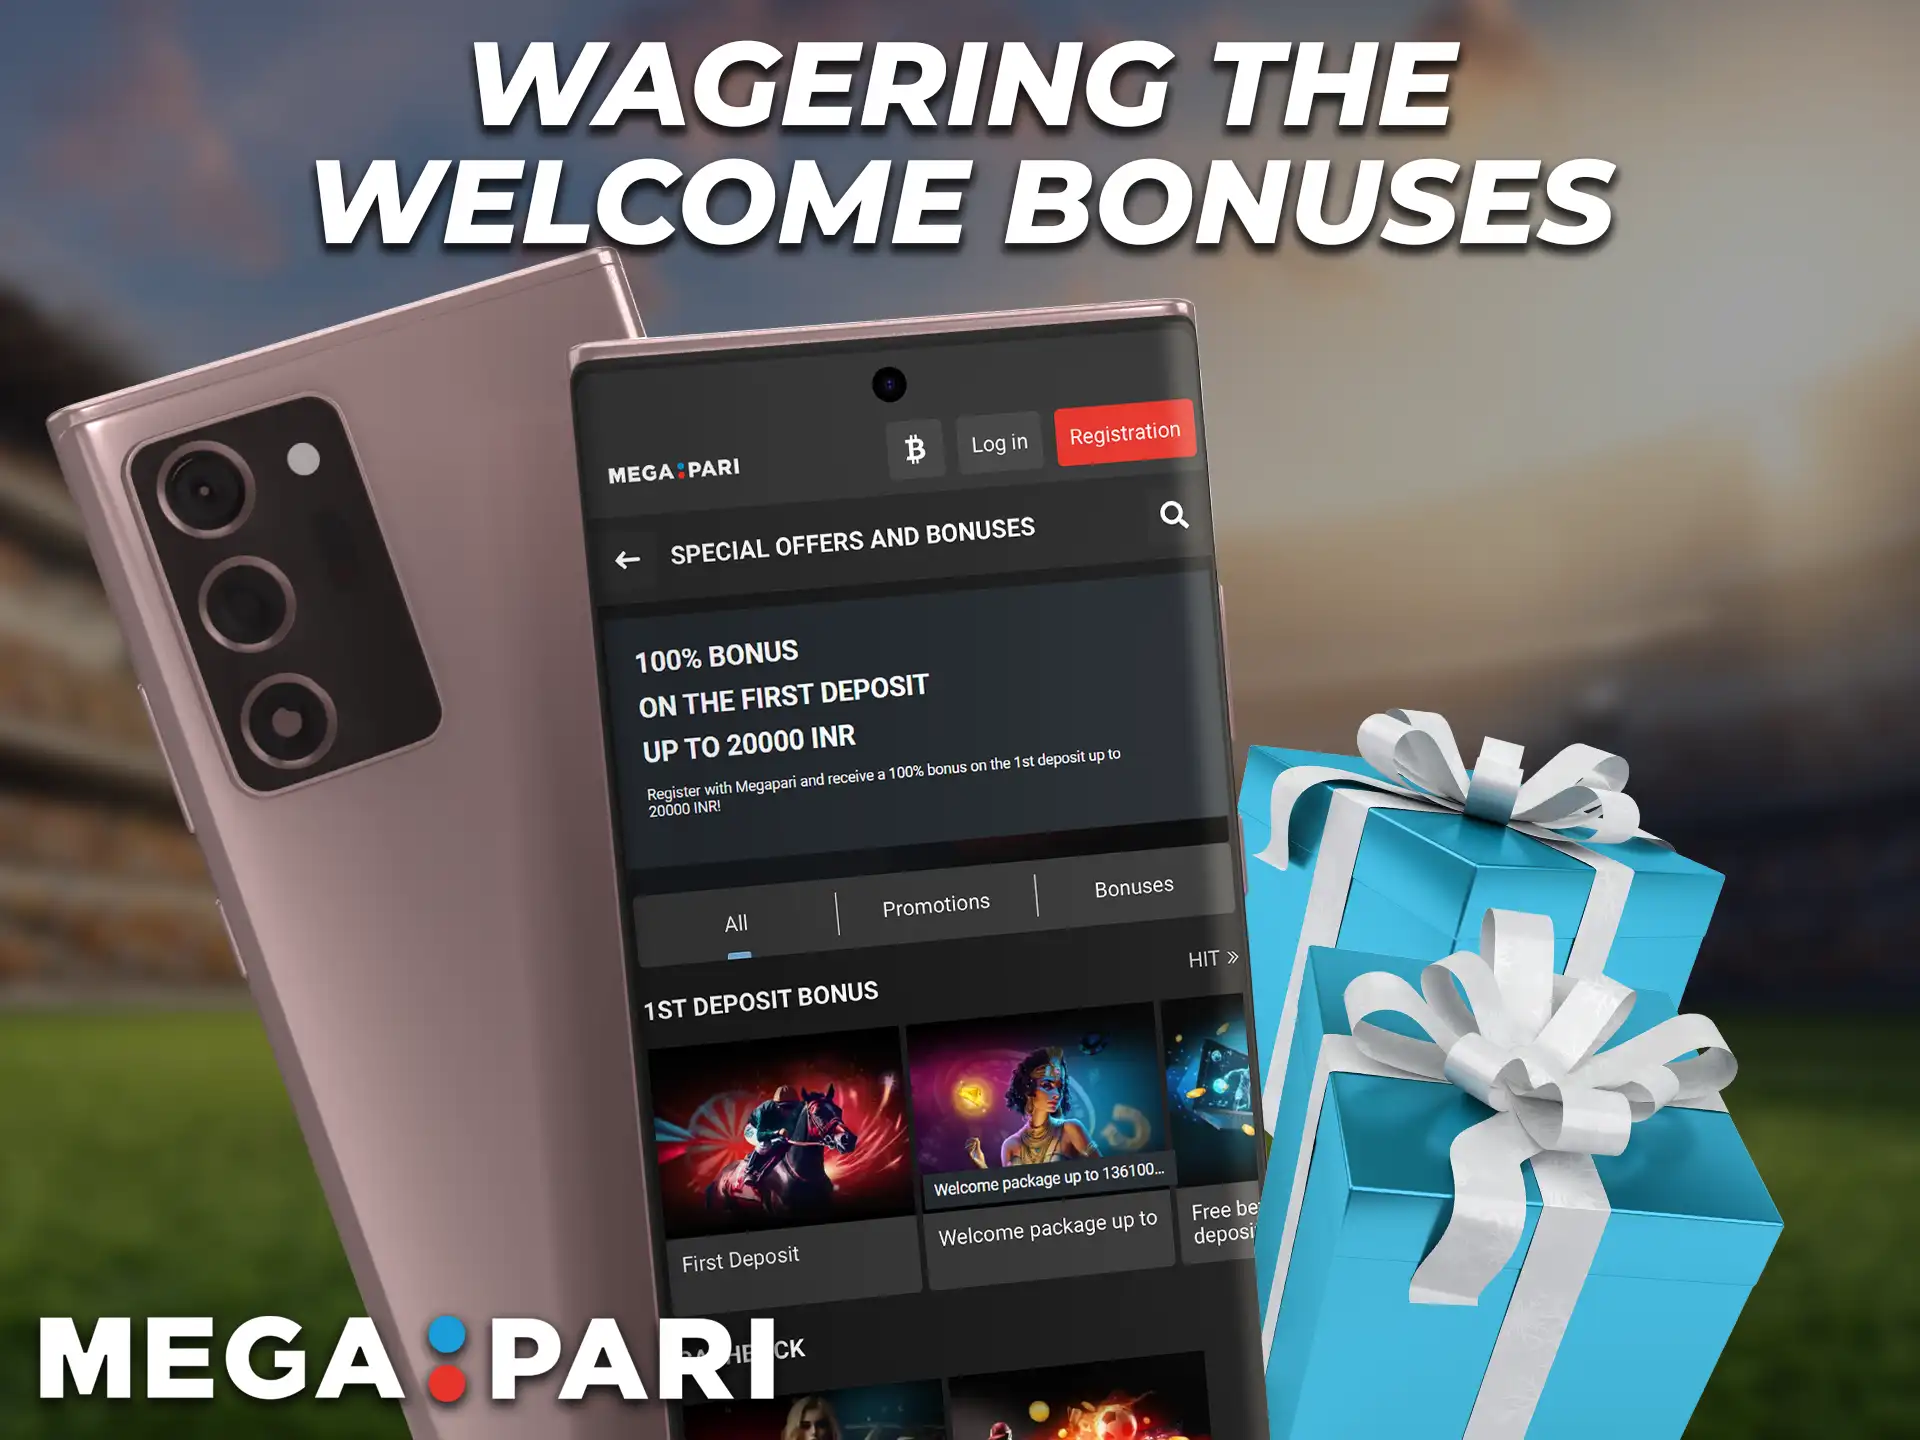 To take advantage of welcome bonuses players should comply with wagering requirements.